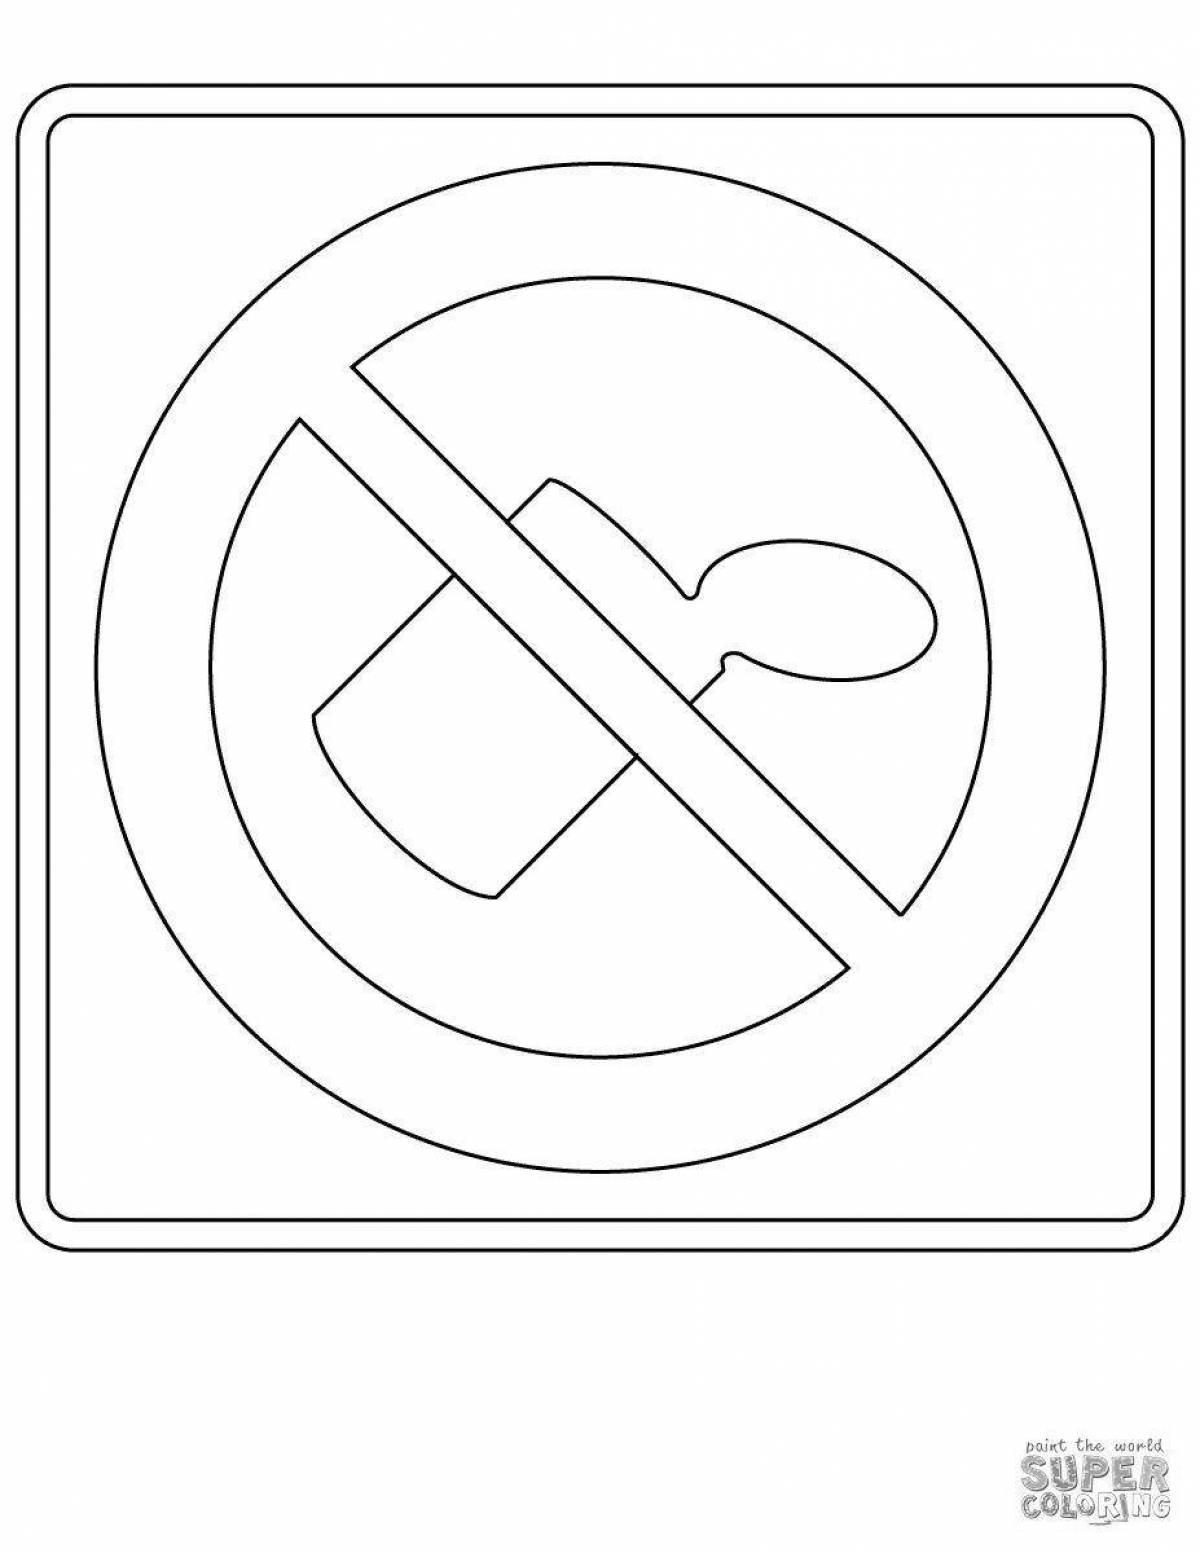 Mysterious horn prohibited road sign coloring book